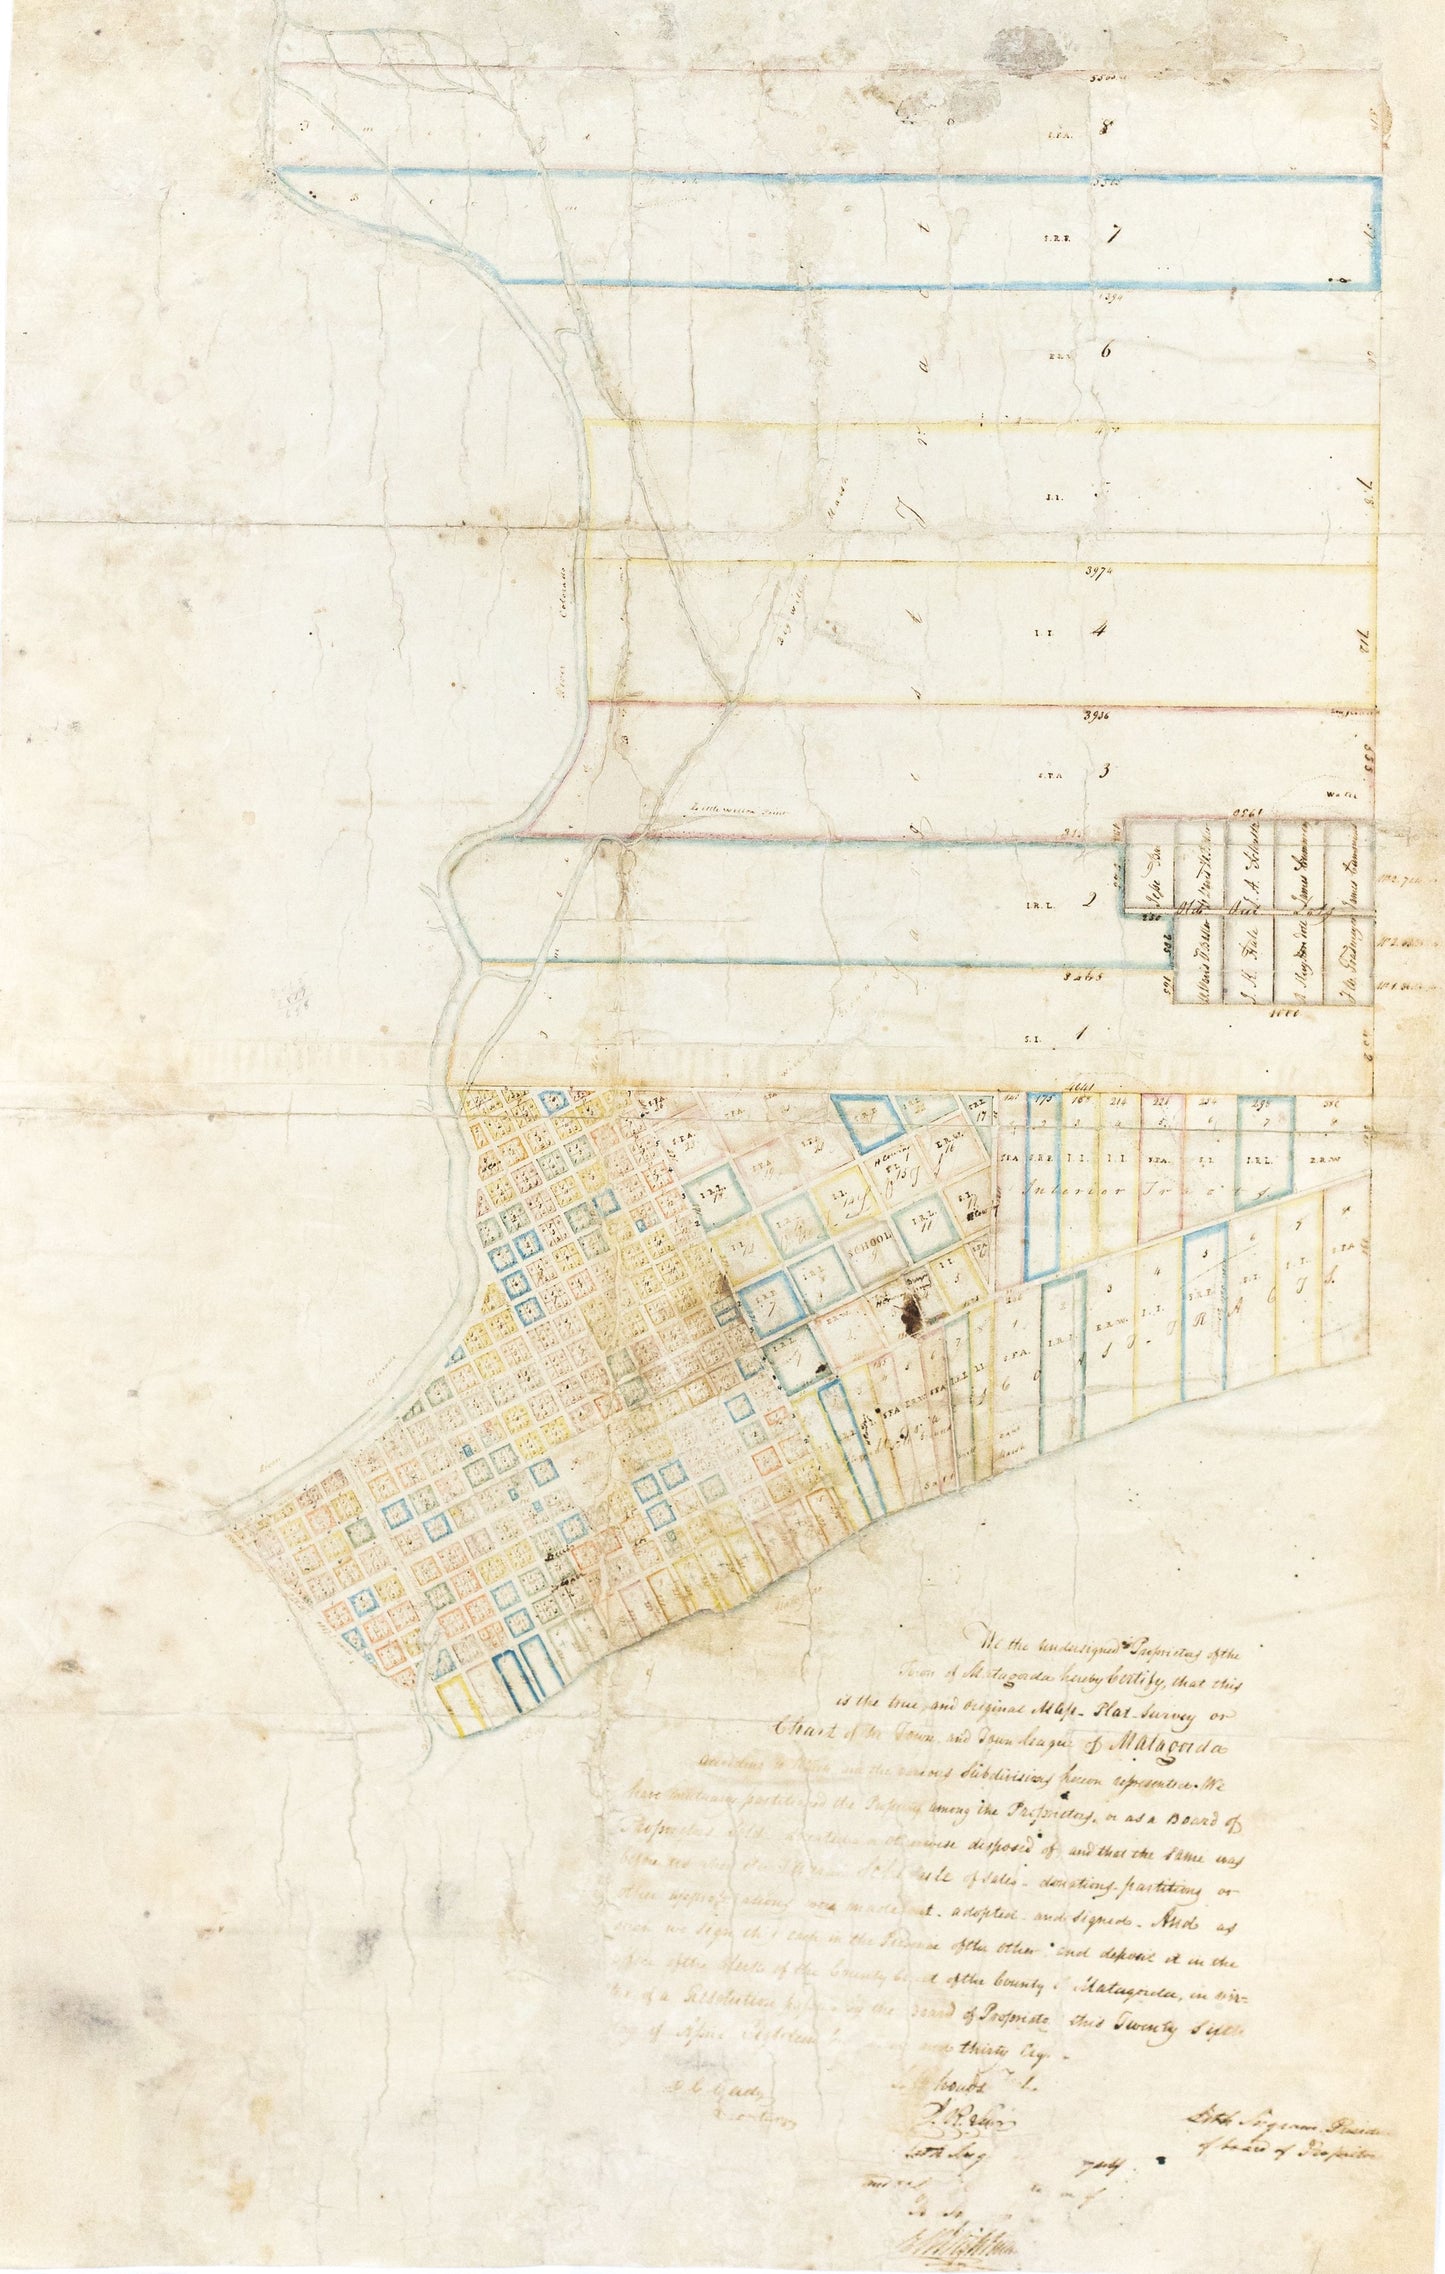 Fisher, Samuel Rhoads and Elias Wightman.  Survey of the Town of Matagorda, Texas and Environs.  1838.